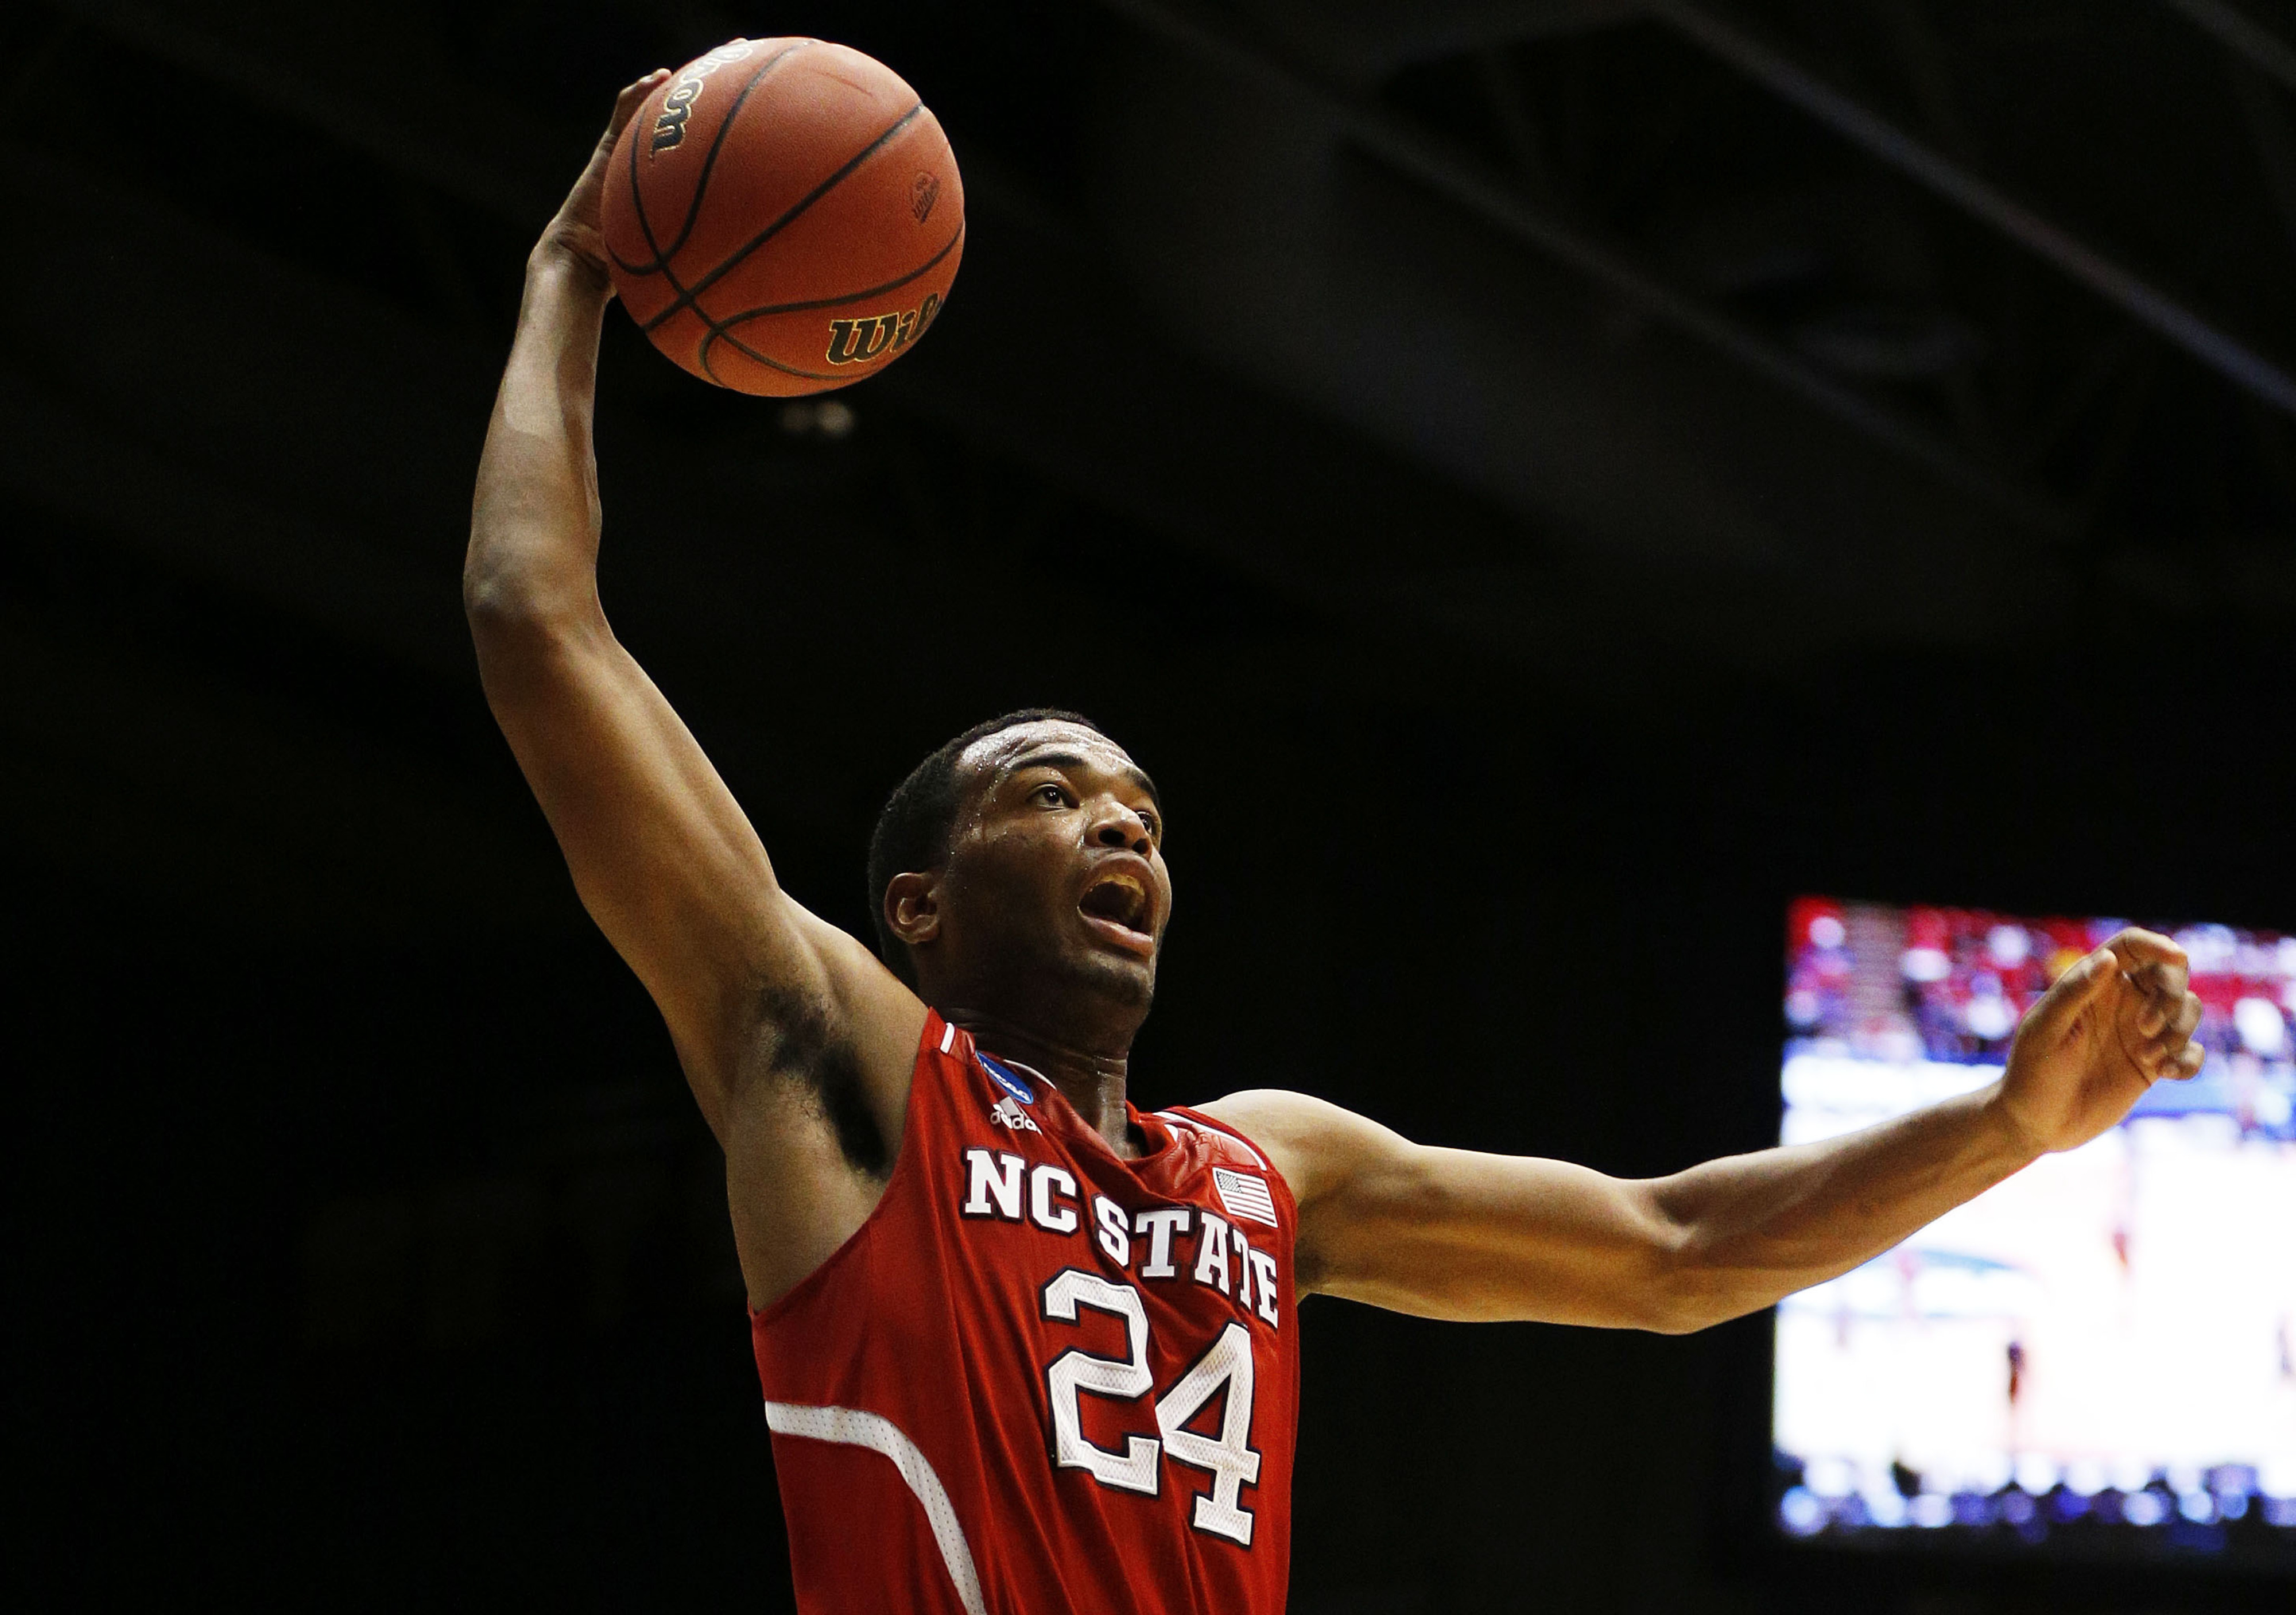 DAYTON, OH - MARCH 18: T.J. Warren #24 of the North Carolina State Wolfpack dunks against the Xavier Musketeers in the second half during the first round of the 2014 NCAA Men's Basketball Tournament at at University of Dayton Arena on March 18, 2014 